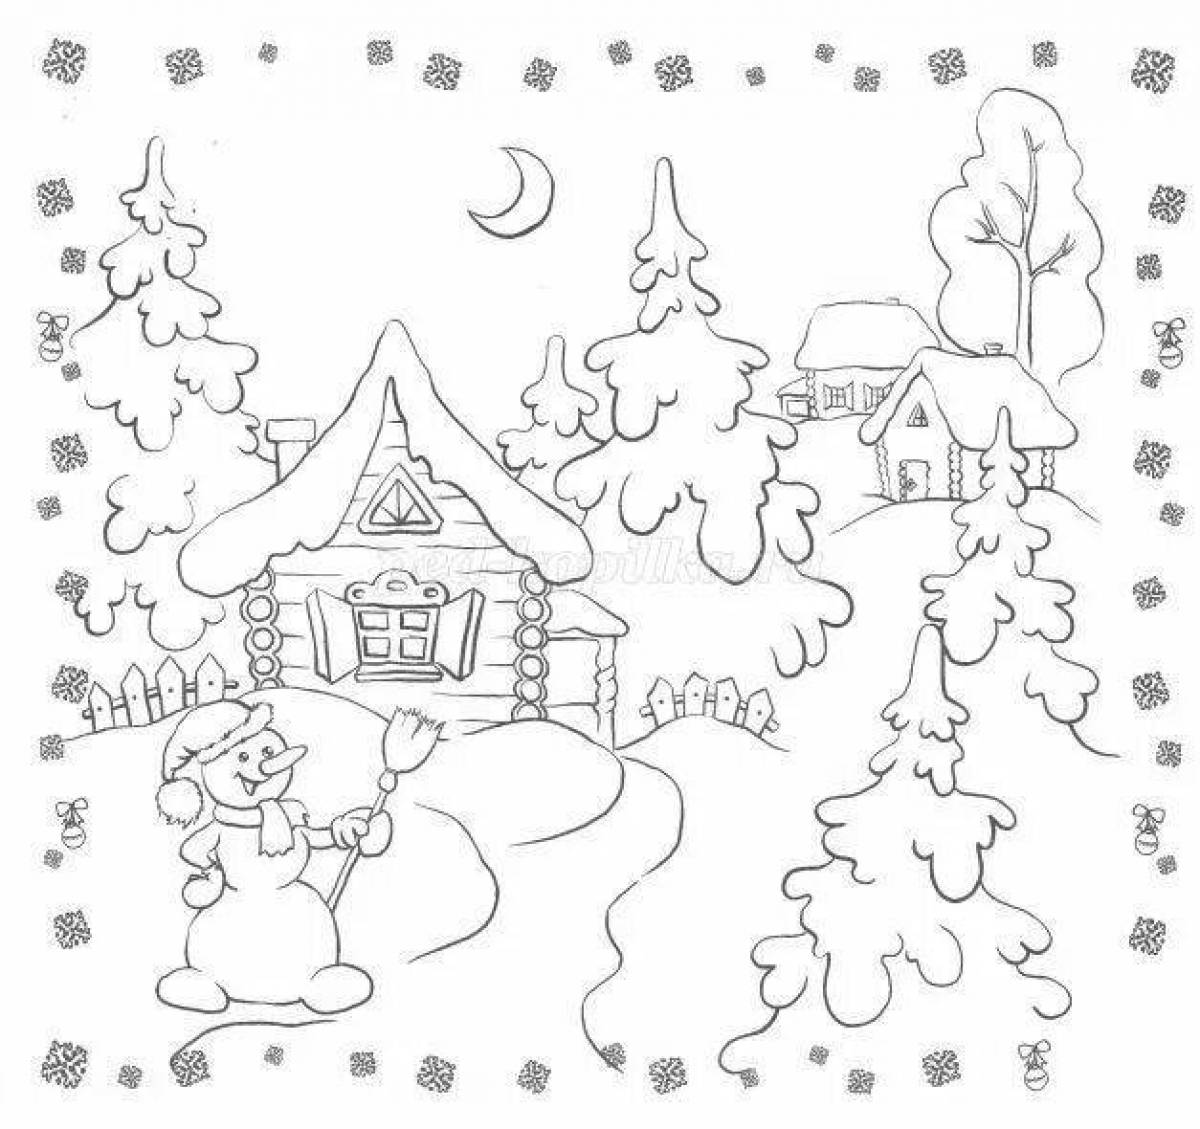 Bright winter forest coloring book for 4-5 year olds